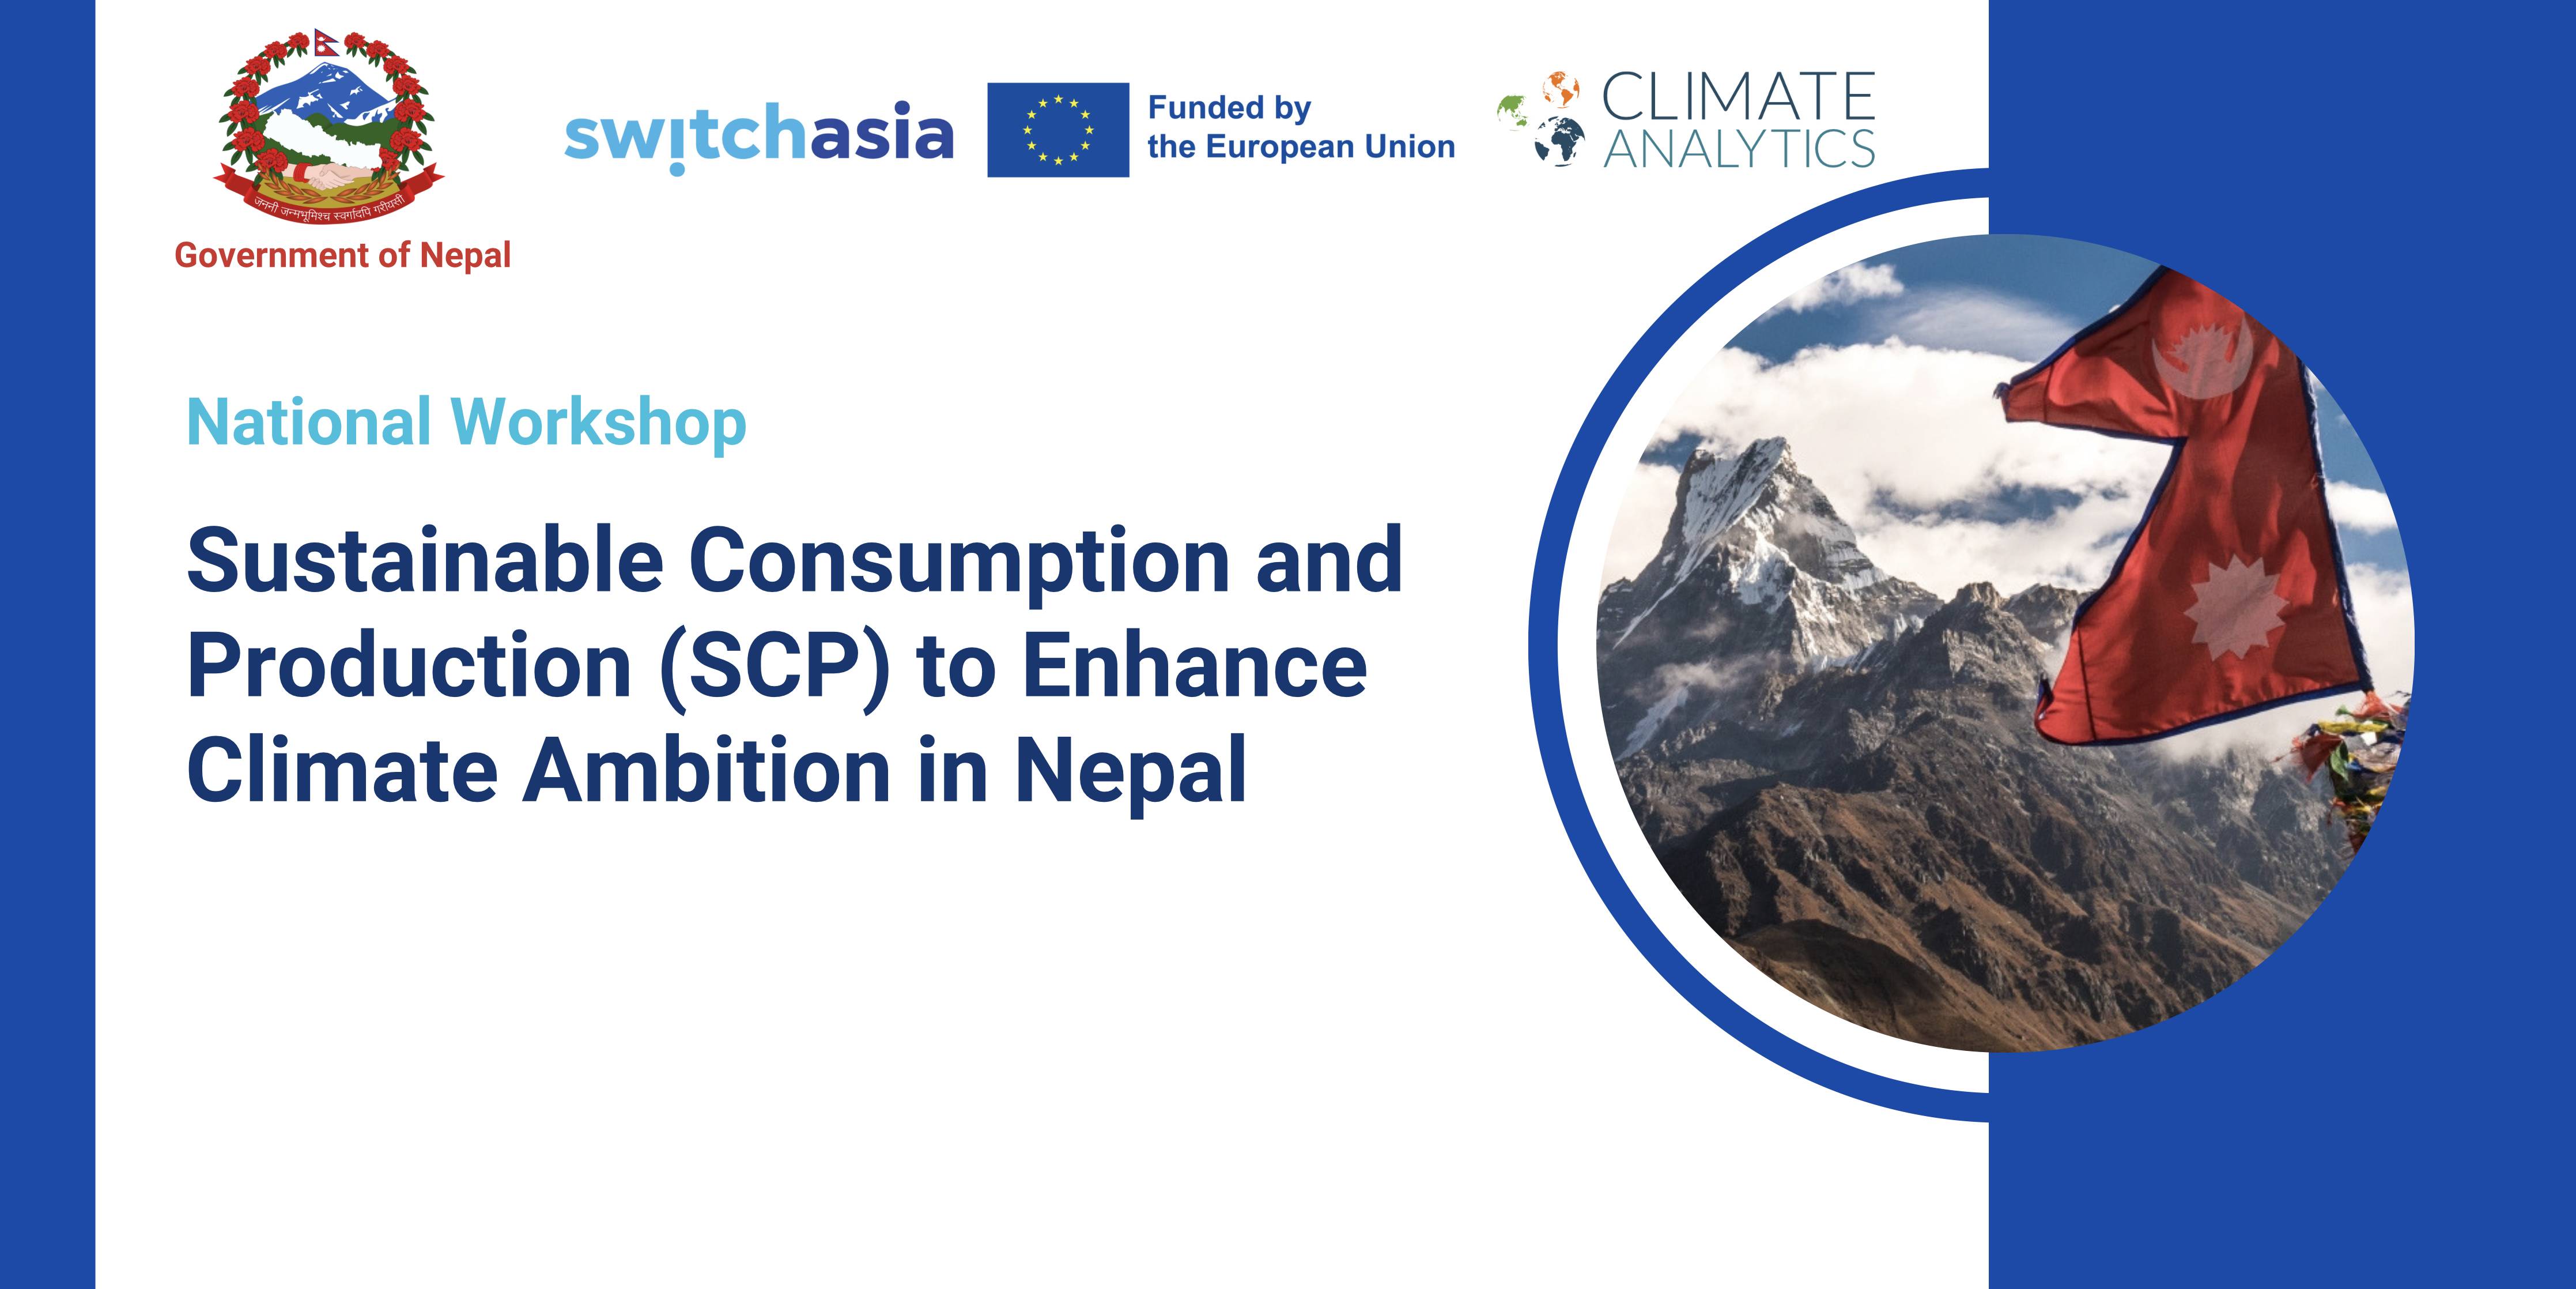 National Workshop on Sustainable Consumption and Production to Enhance Climate Ambition in Nepal